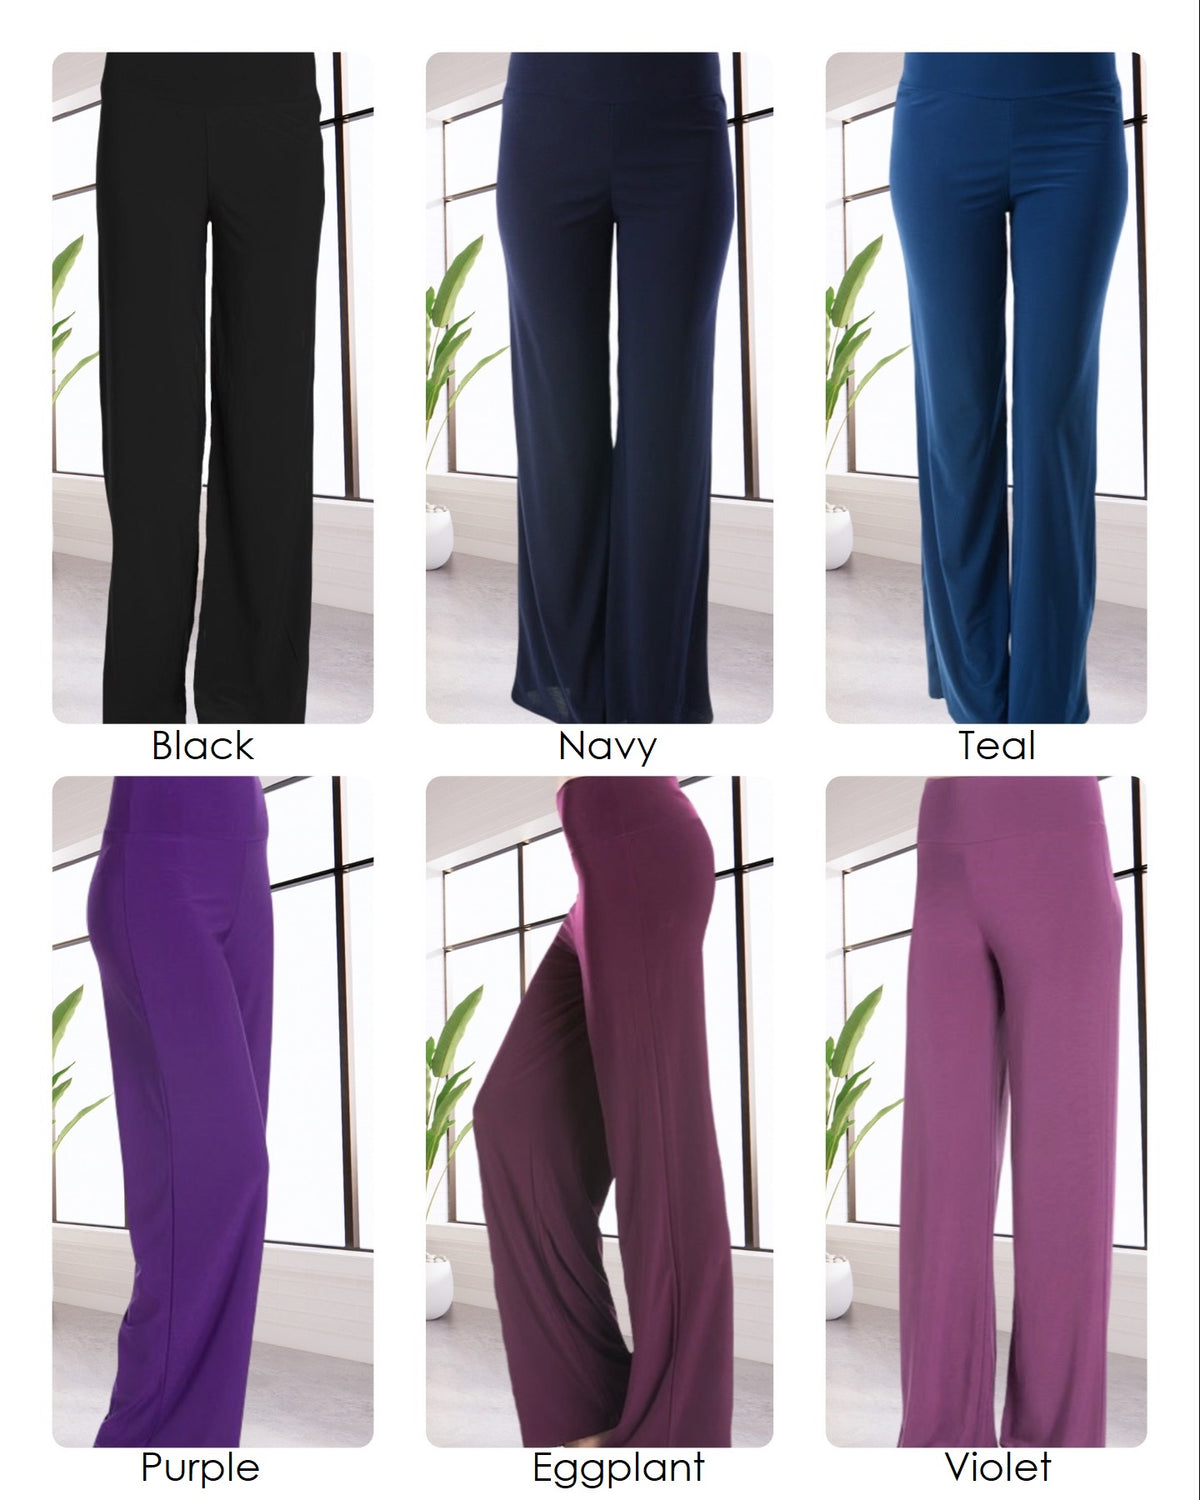 womens misses priscilla palazzo pant foldover yoga waistband slinky ITY material fabric 95/5 poly/spandex stretchy loungewear to evening wear casual to dressy comfort stretch waistband true to size 6 colors: Black, Navy Blue, Teal Blue, Purple, Eggplant, Violet